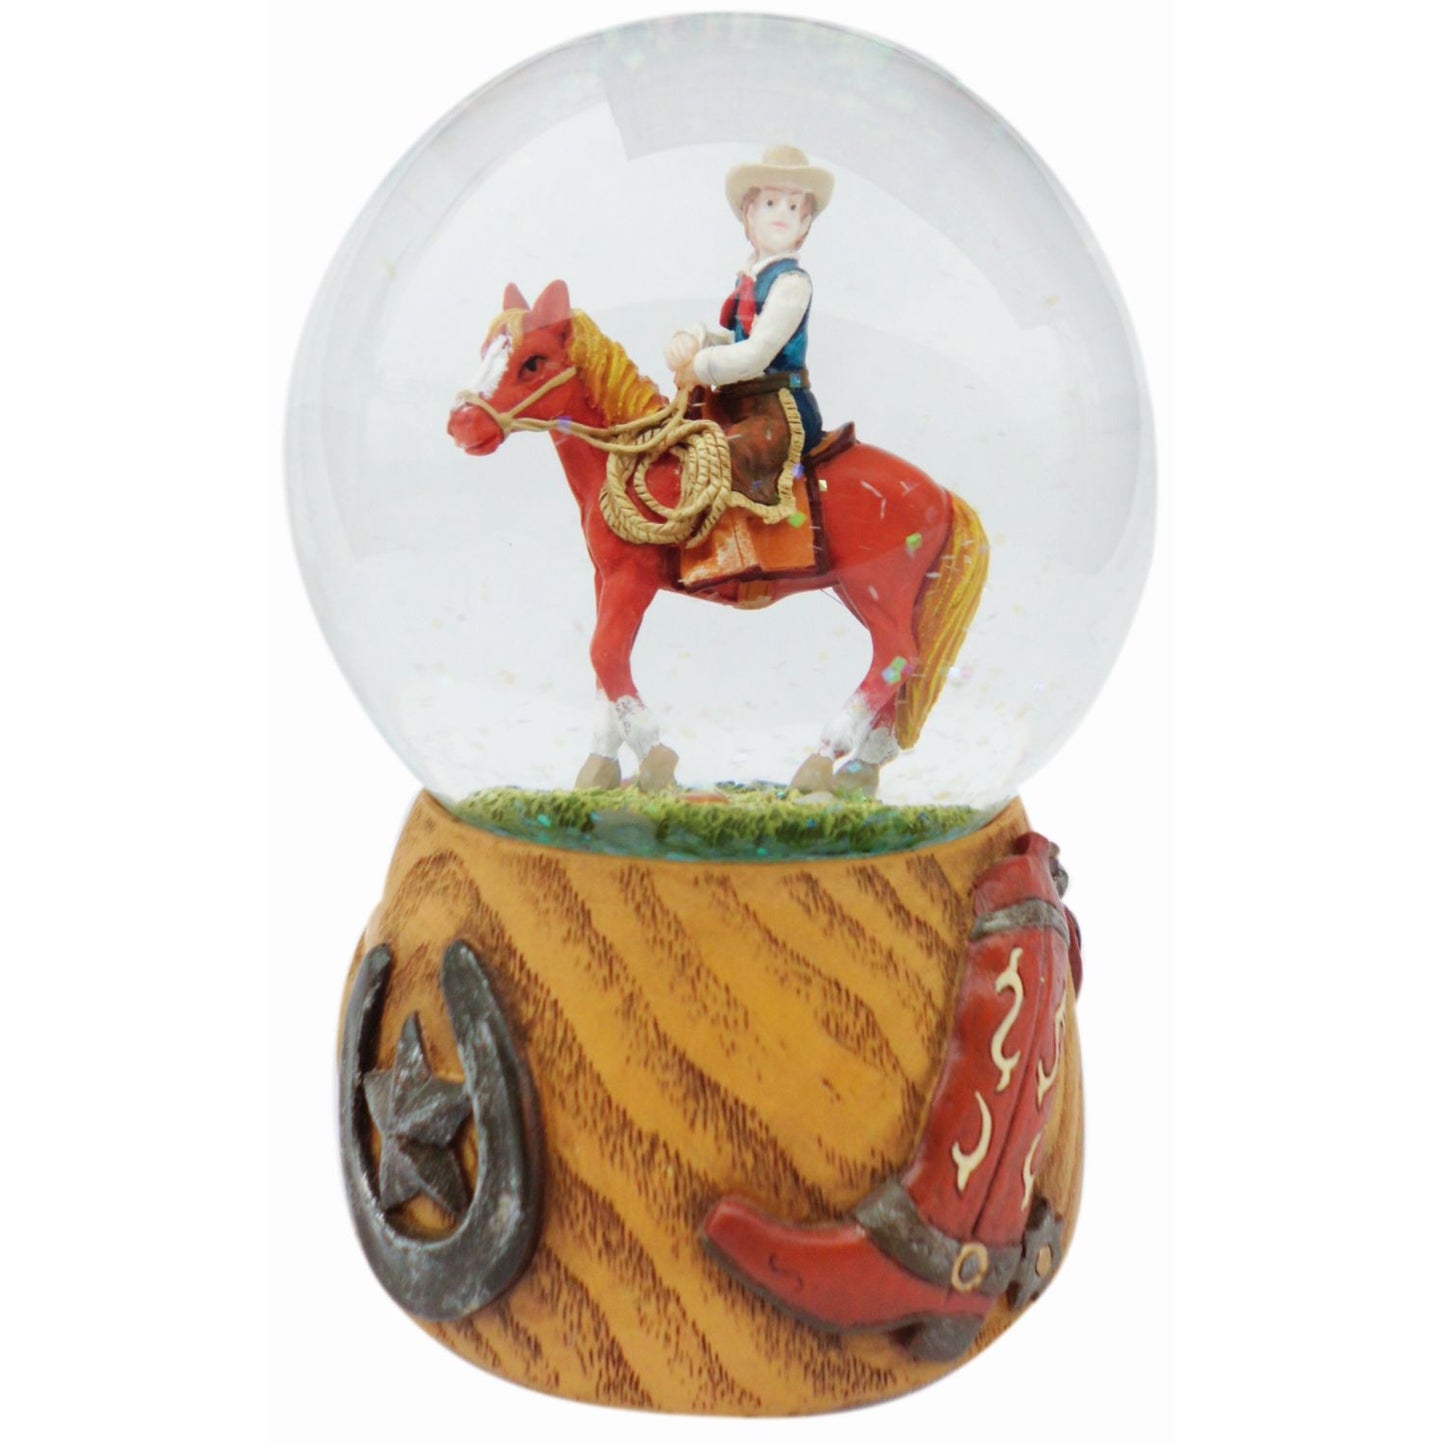 Musicbox Kingdom 3.9" Snow Globe Cowboy Turns To The Sound Of A Famous Melody